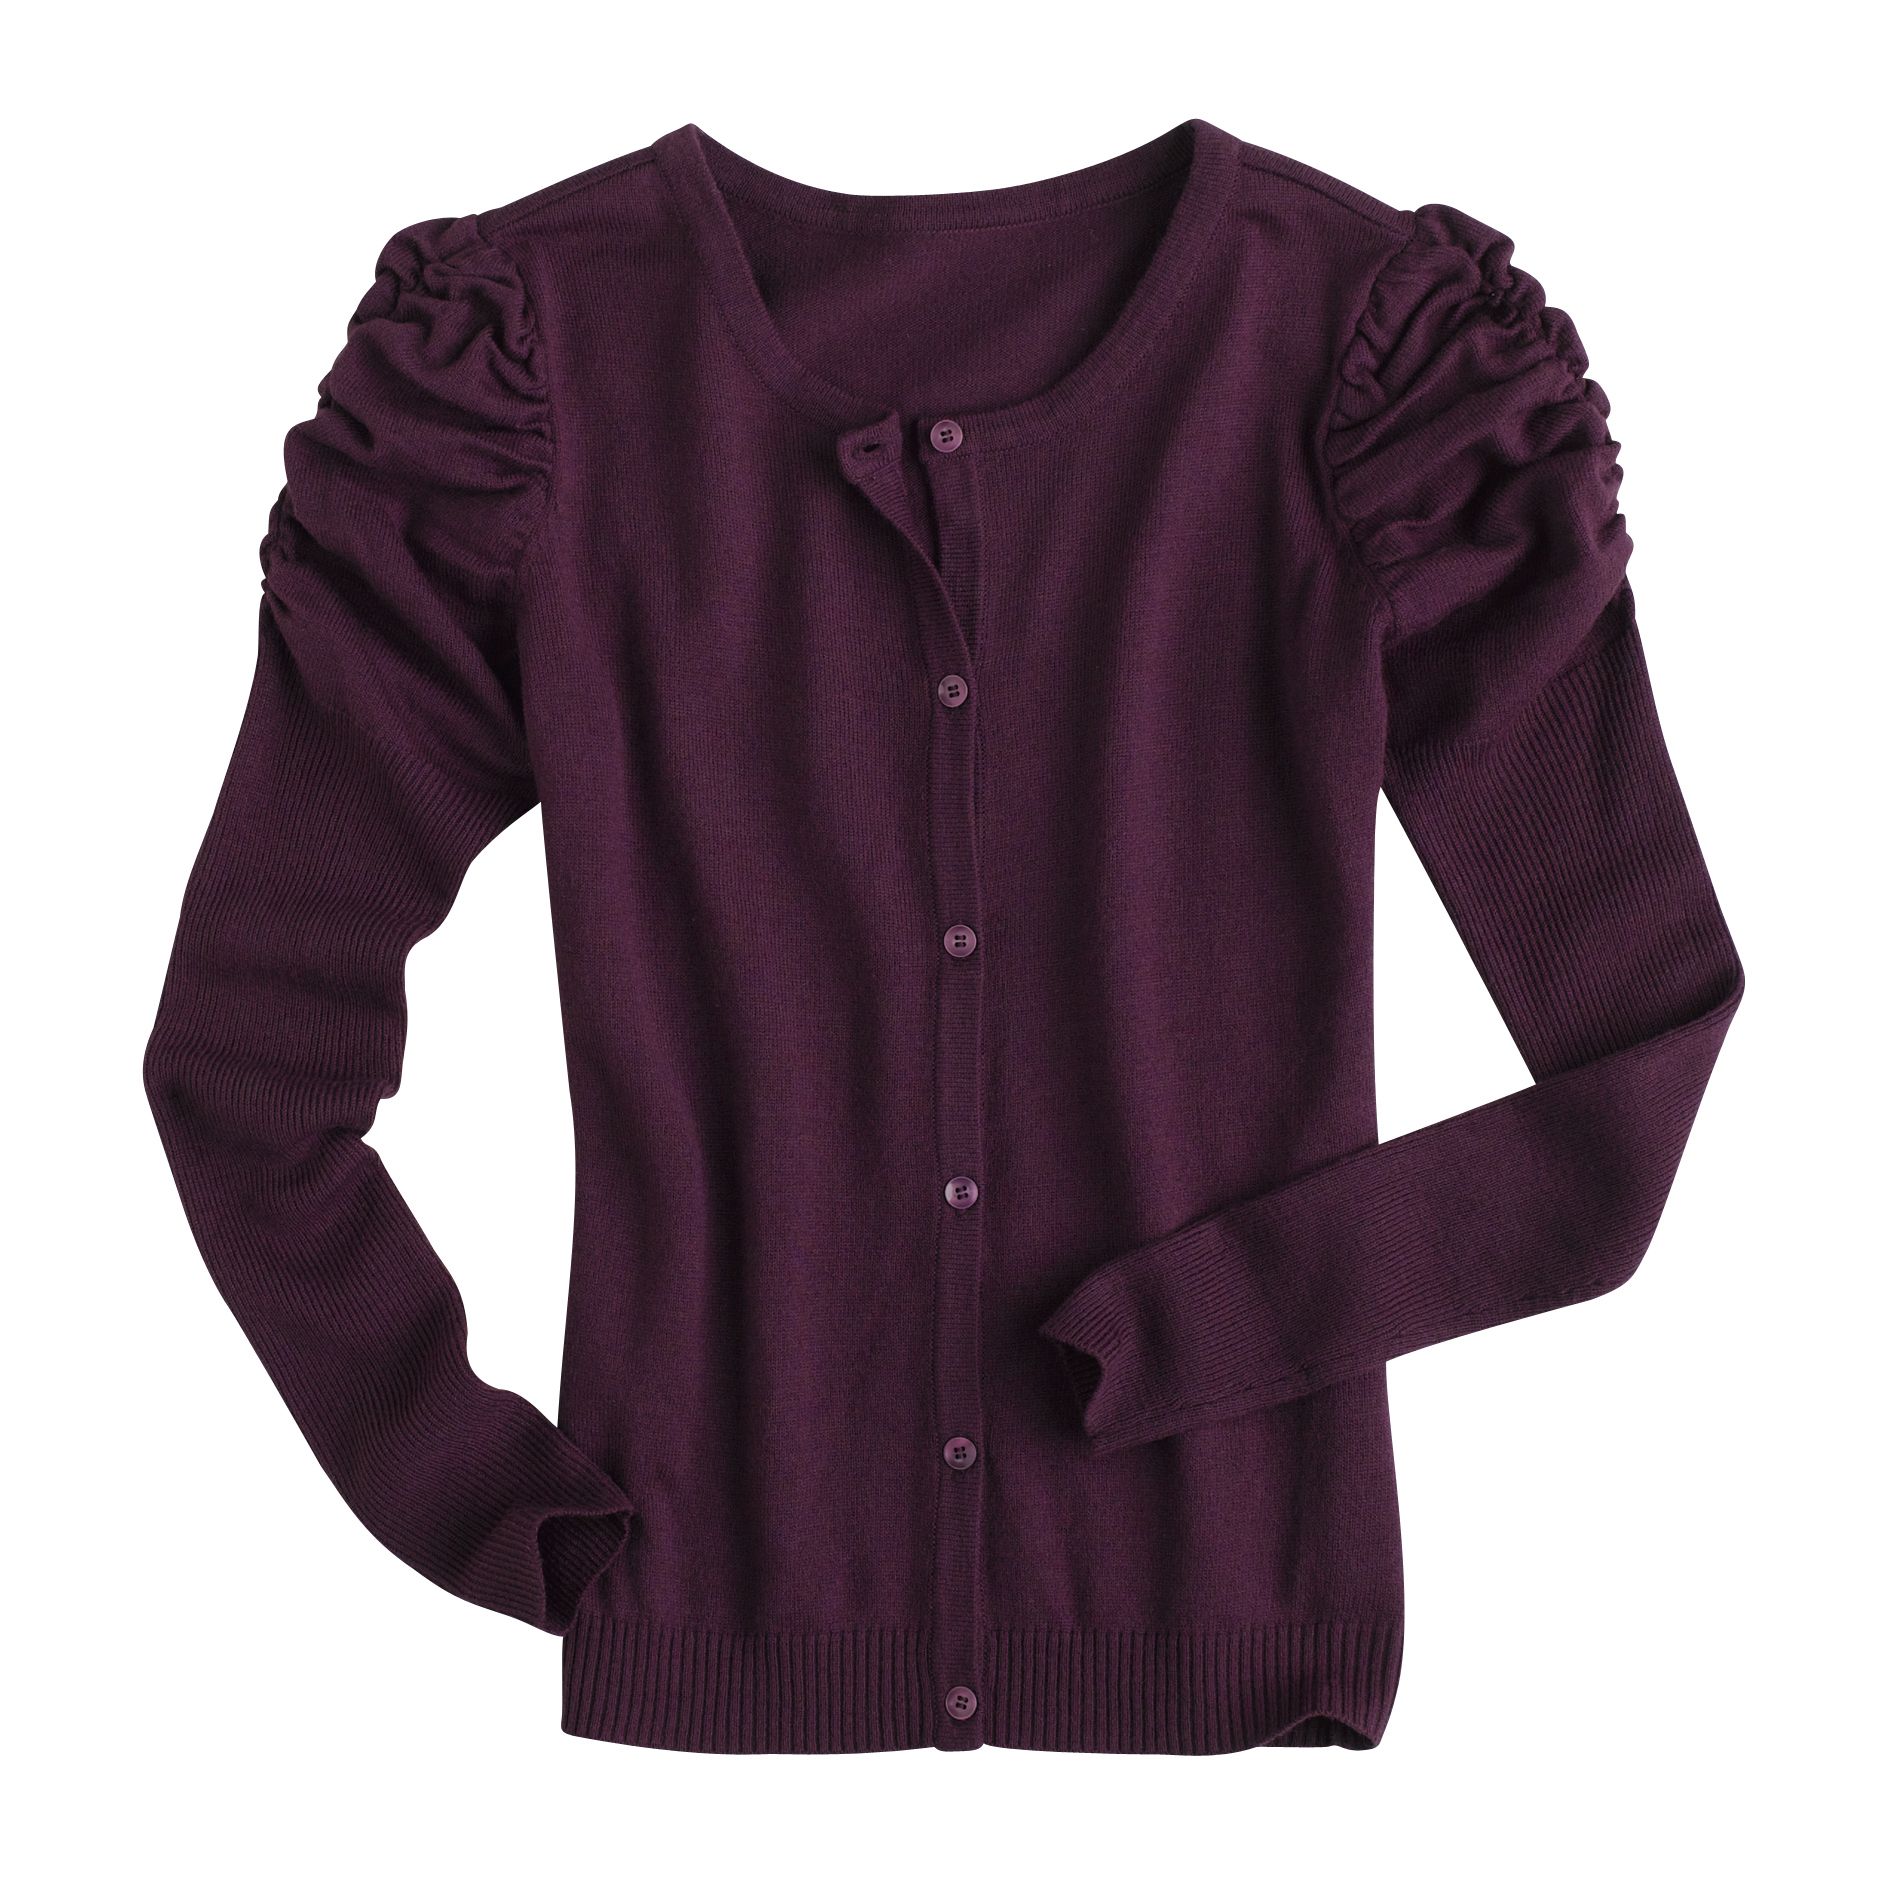 Attention Women's Rouched Sleeved Cardigan